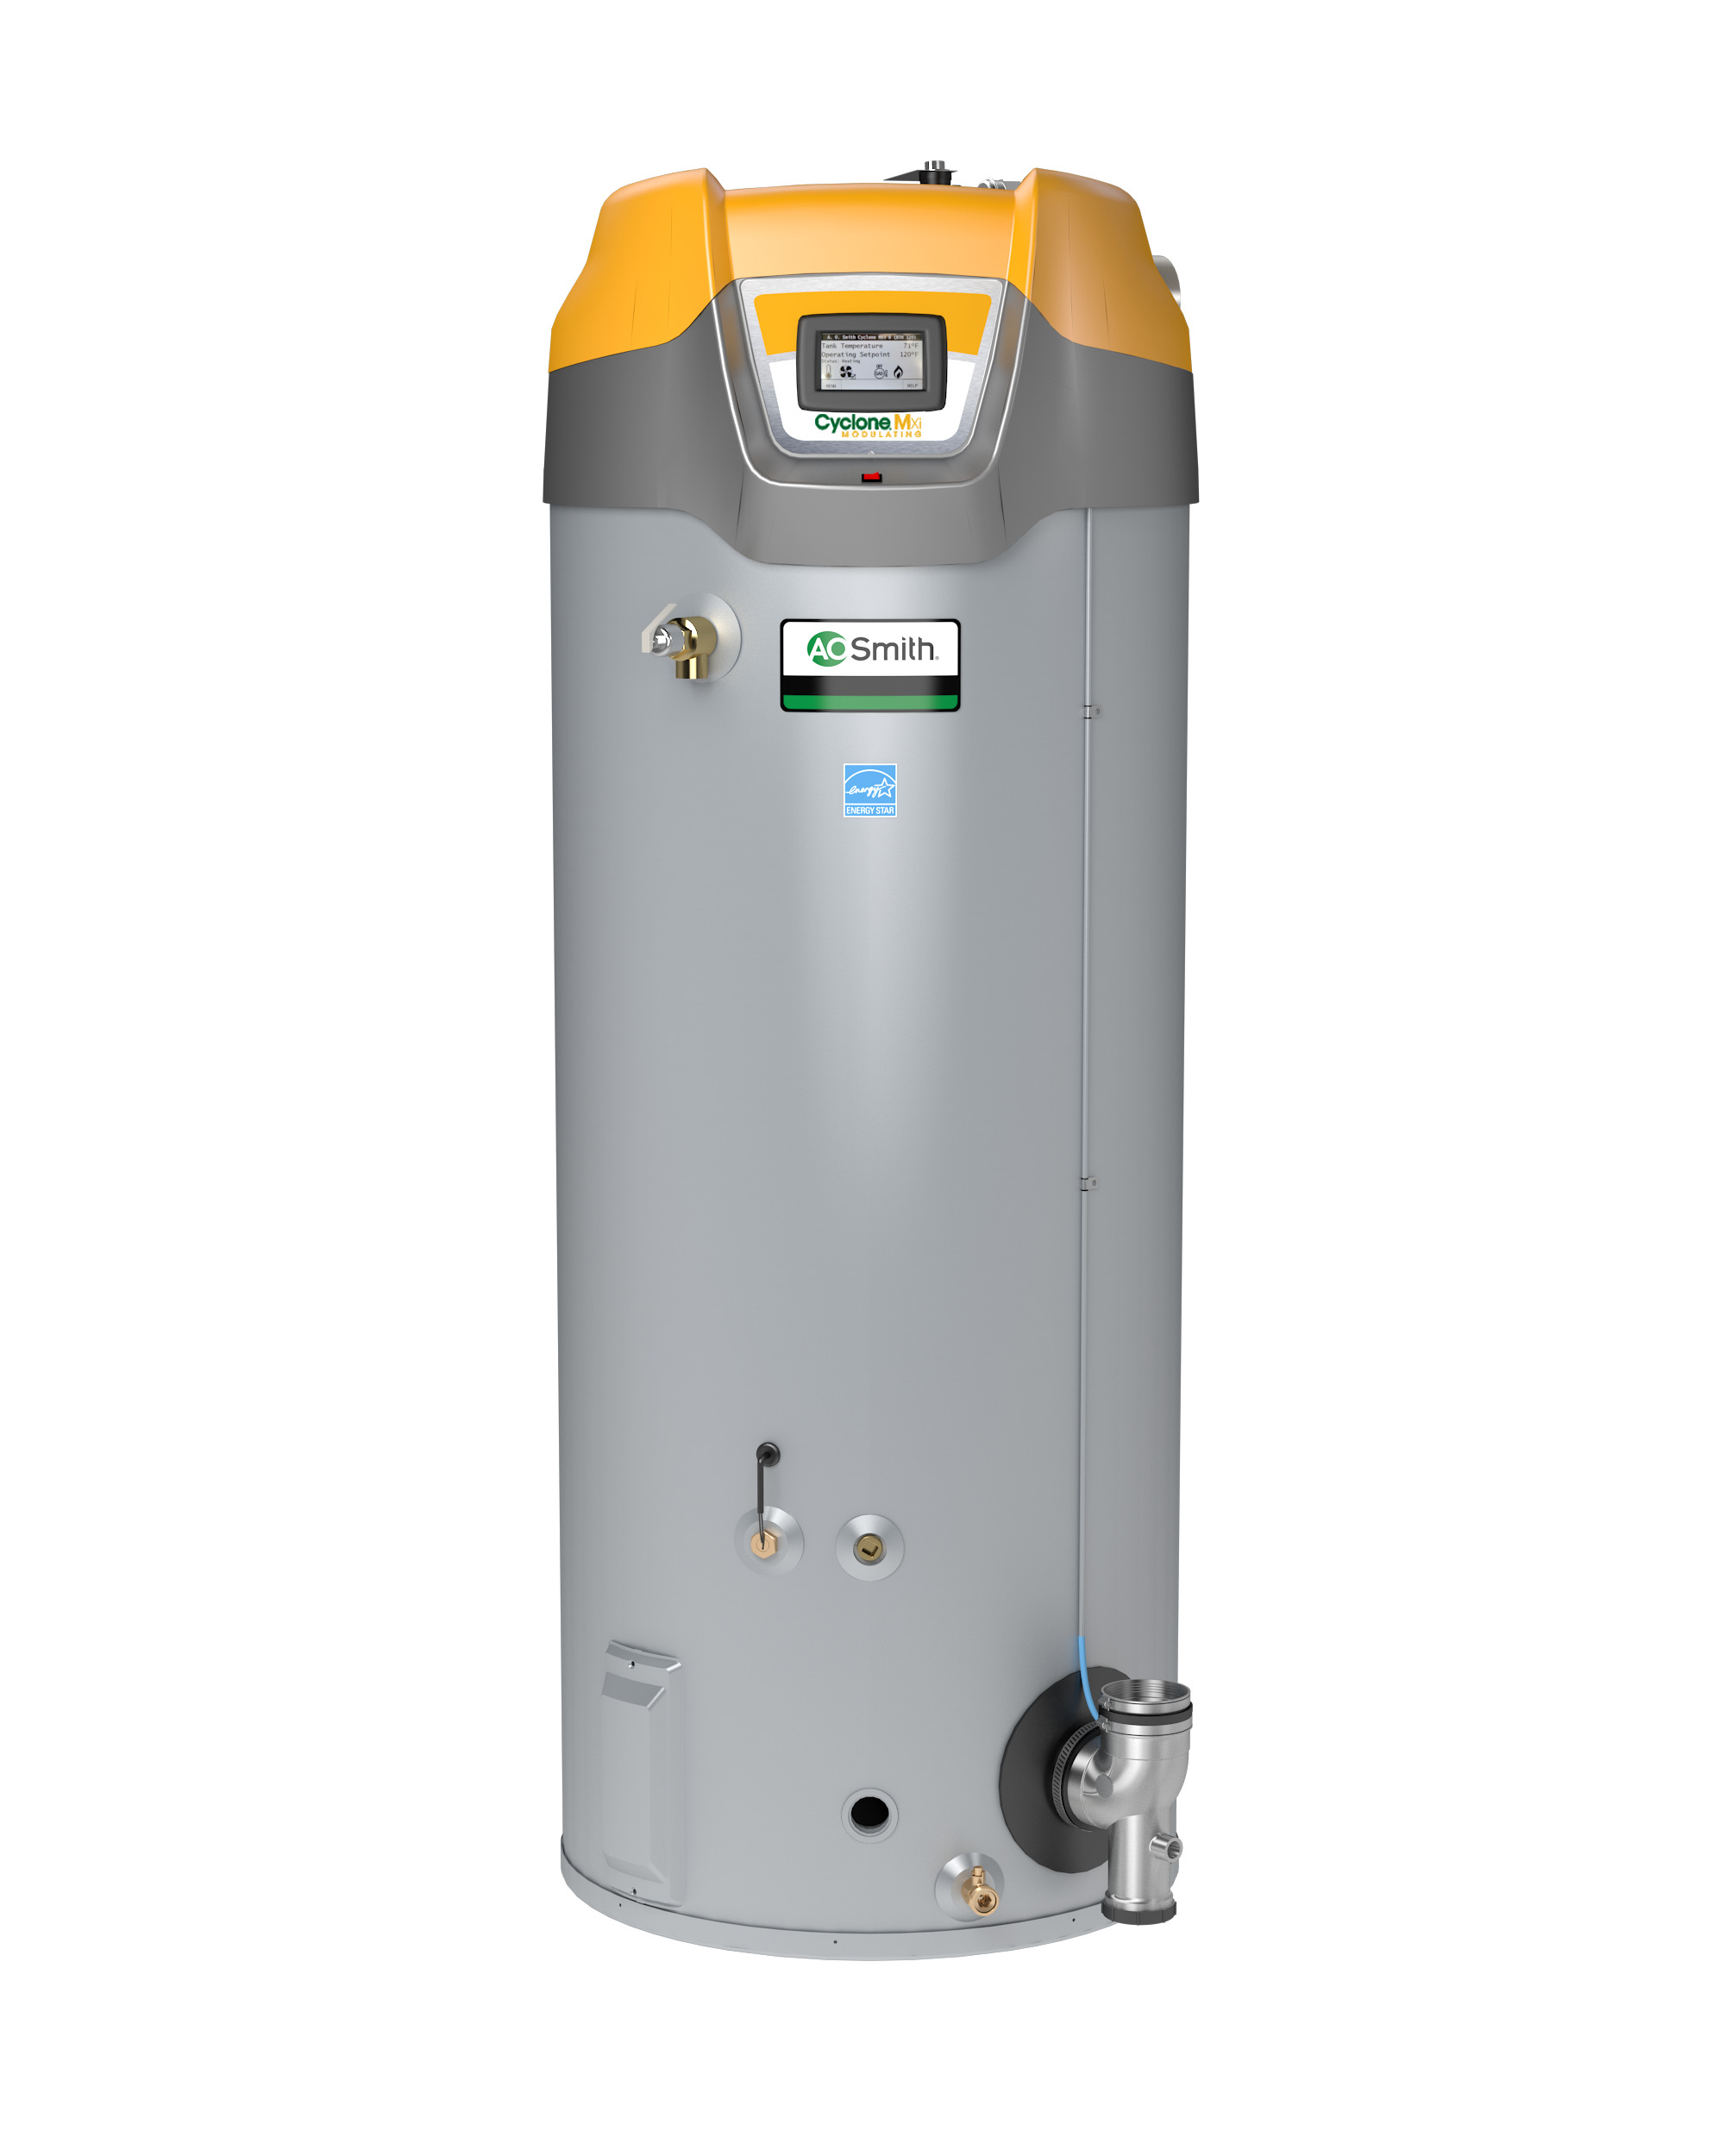 AO SMITH BTH-500A-LP: 119 GALLON, 499,900-BTU, UP TO 95% THERMAL EFFICIENCY, ASME, 4" VENT, LP (LIQUID PROPANE) CYCLONE Mxi MODULATING COMMERCIAL GAS WATER HEATER